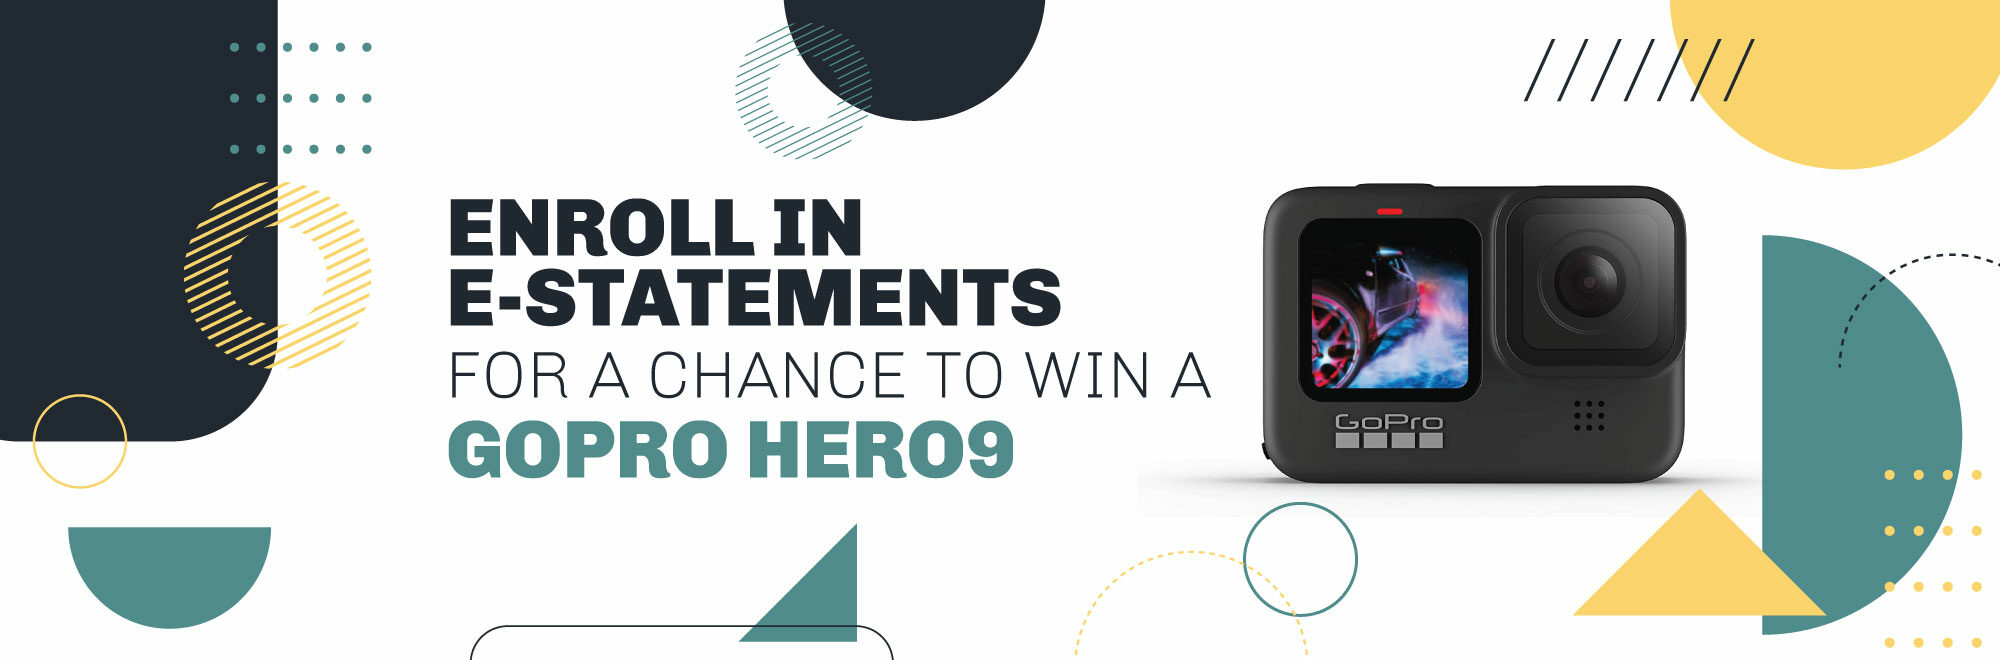 Image of a GoPro with text reading, "Enroll in e-Statements for a chance to win a GoPro Hero 9"